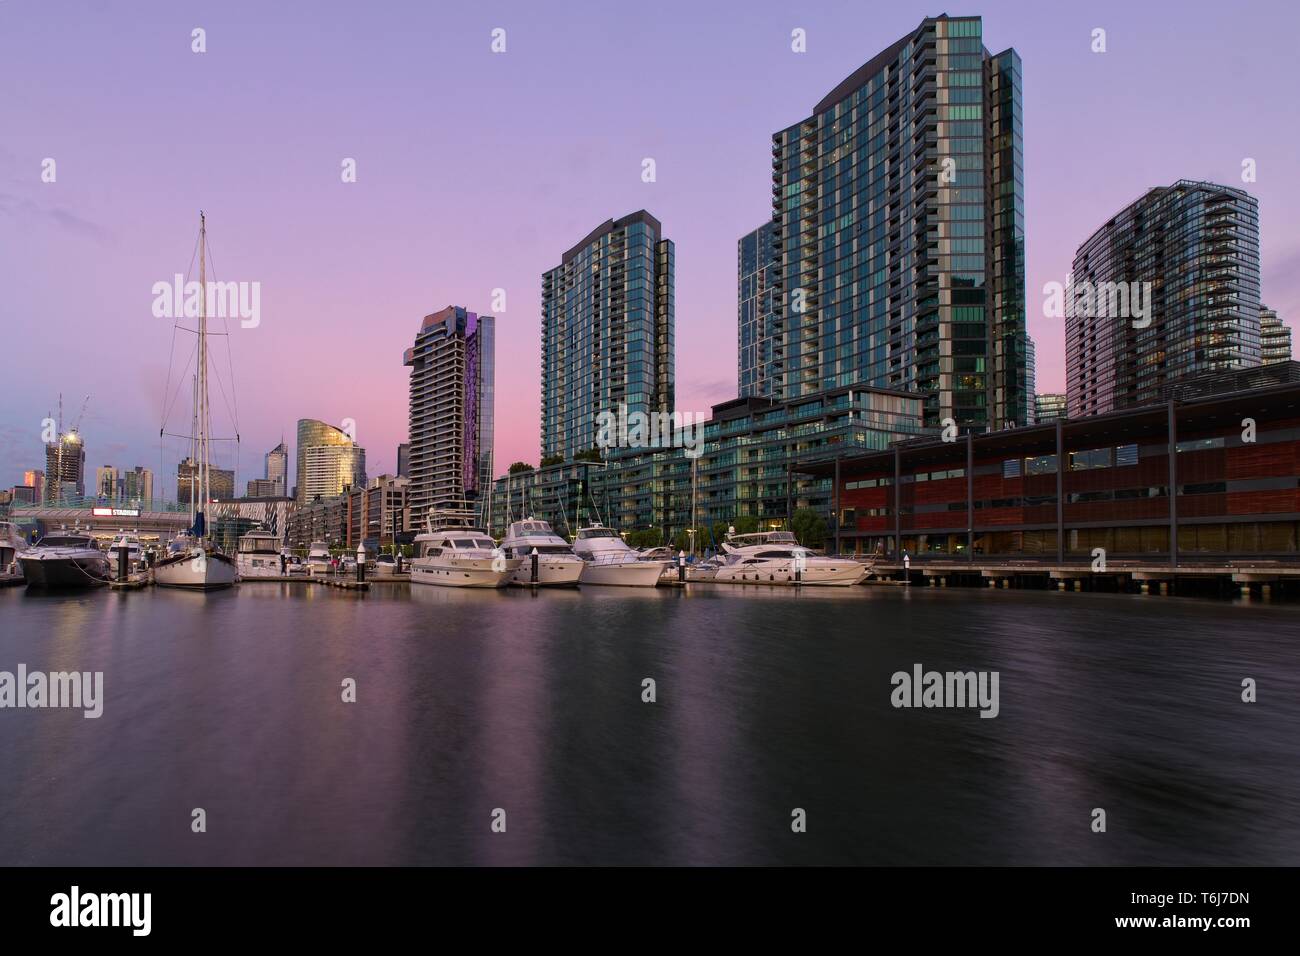 Victoria Harbour Promenade Melbourne Docklands marina and tall apartment buildings in the pink and mauve tones of sunset Stock Photo